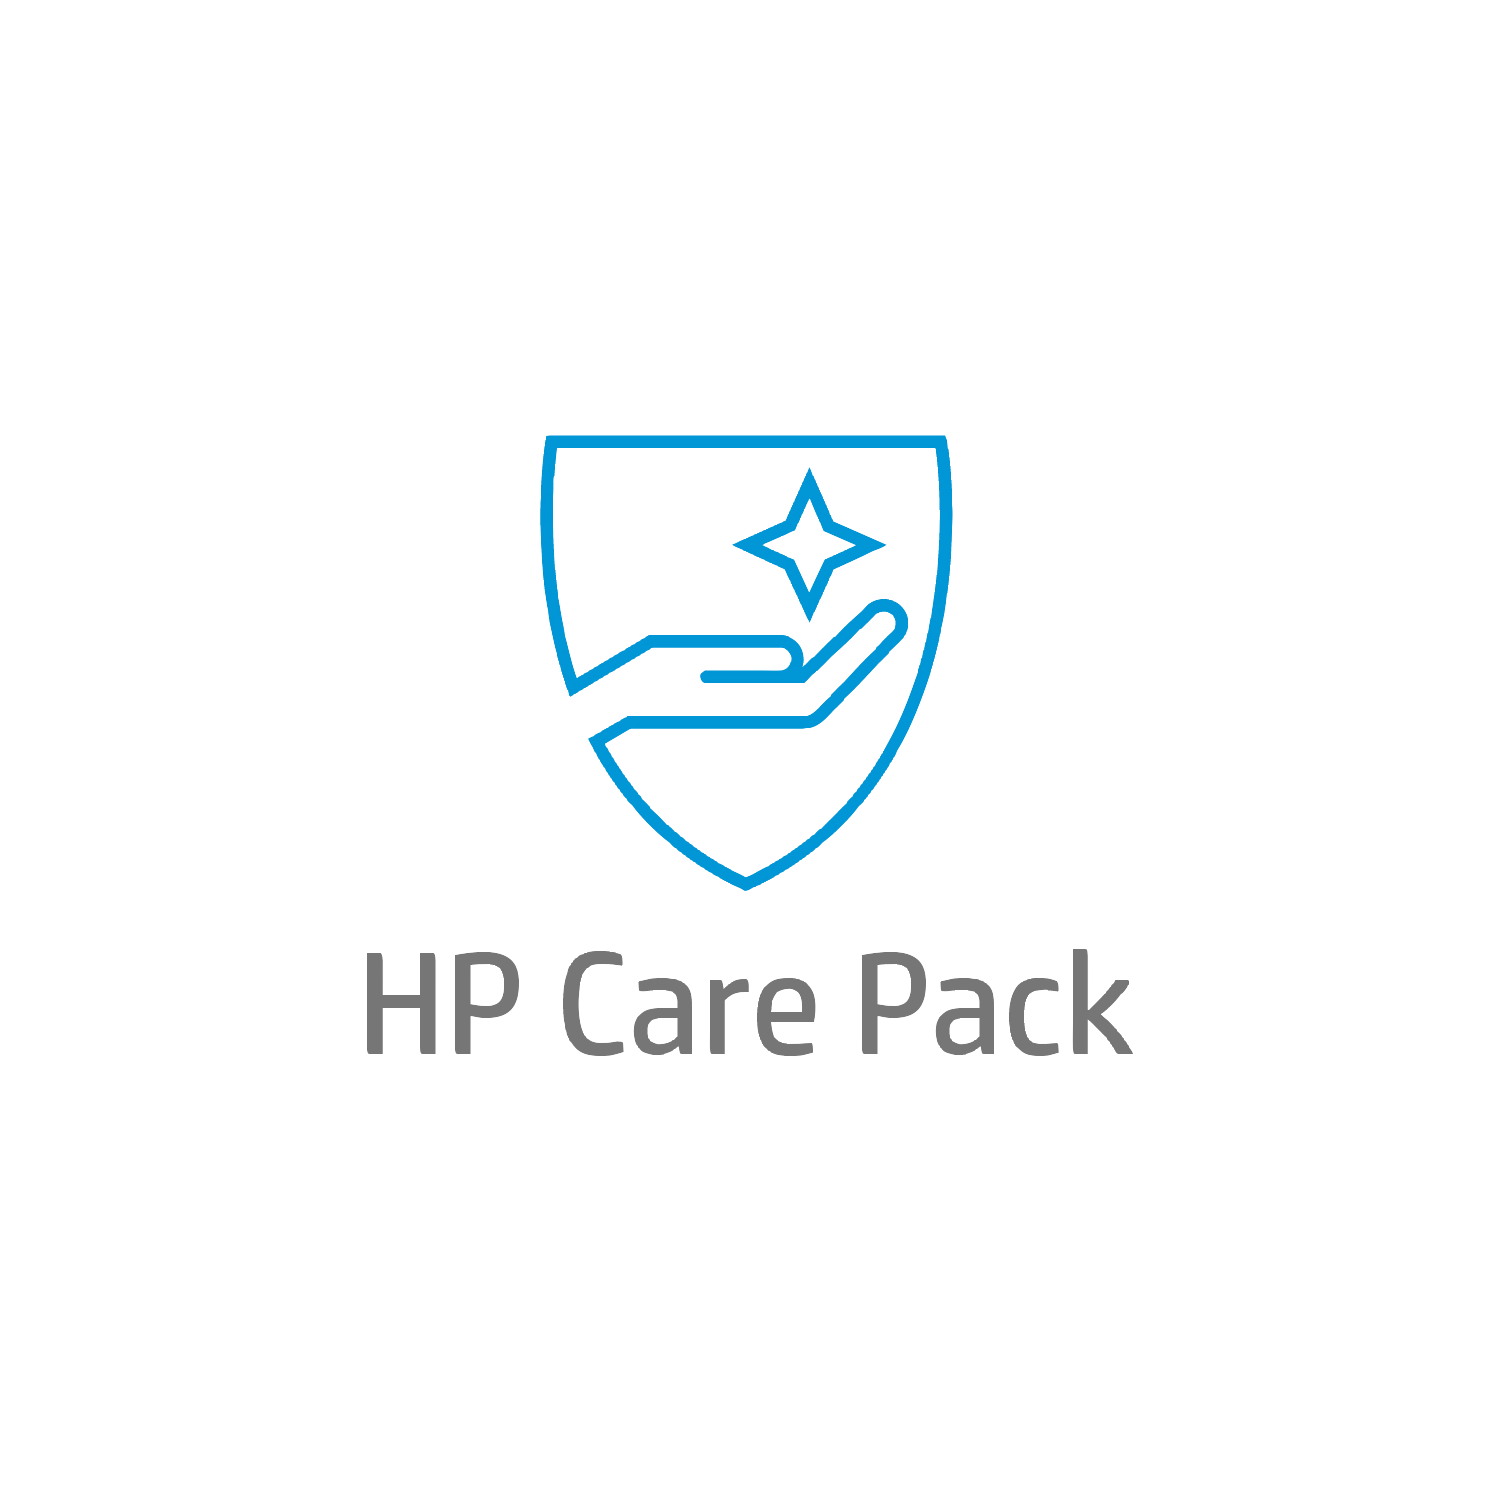 HP Inc Electronic HP Care Pack Next Business Day Hardware Support with Defective Media Retention